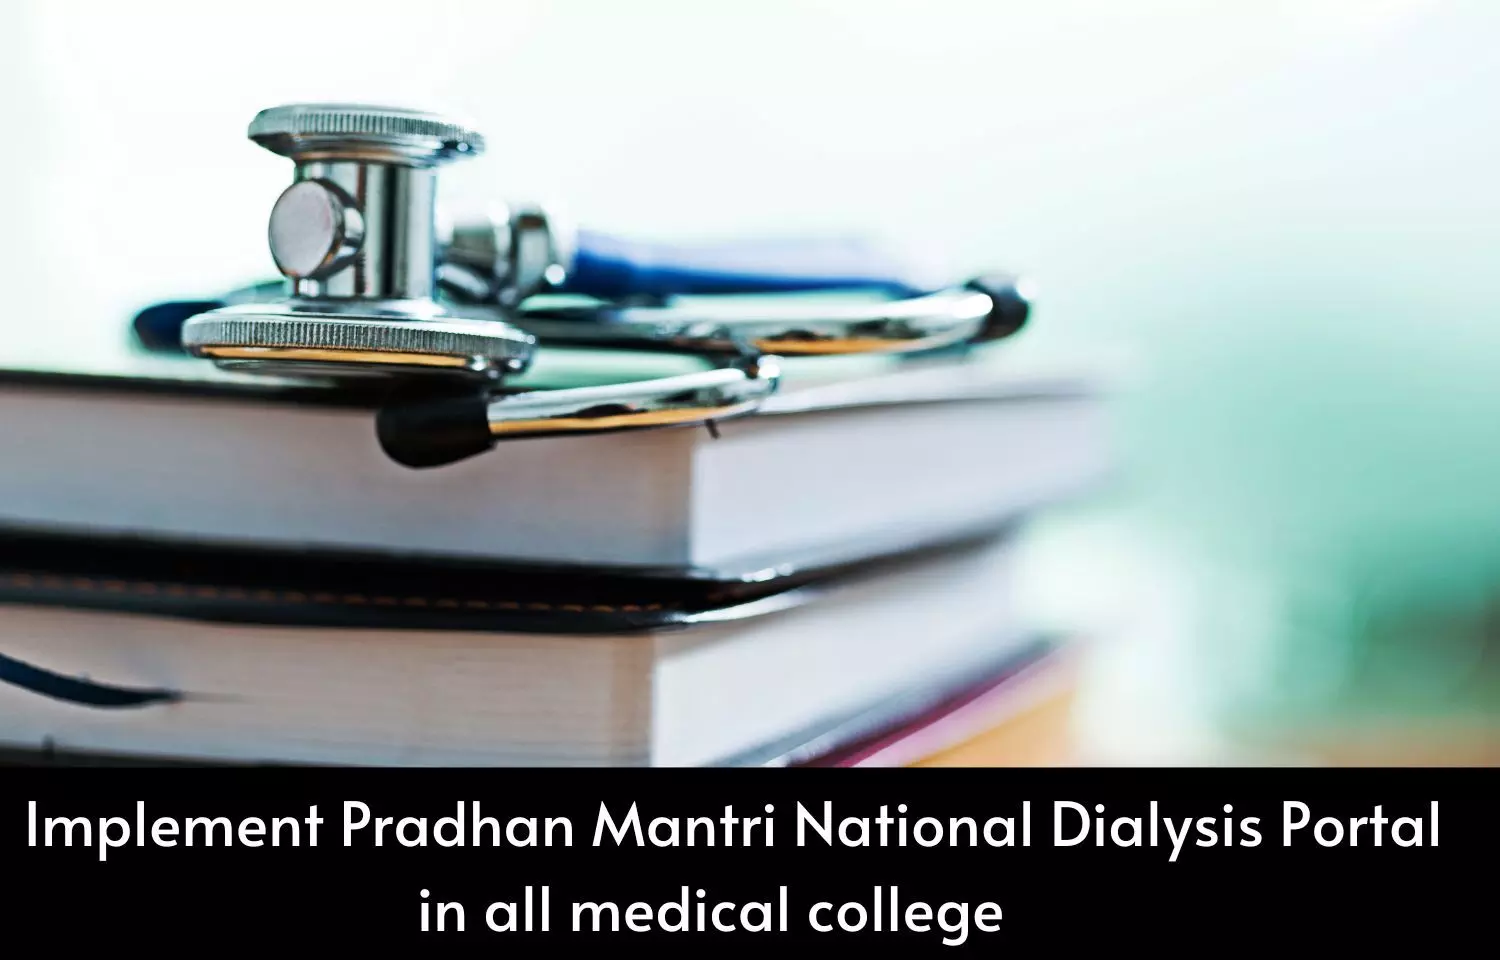 NMC directs all medical colleges to implement Pradhan Mantri National Dialysis Portal